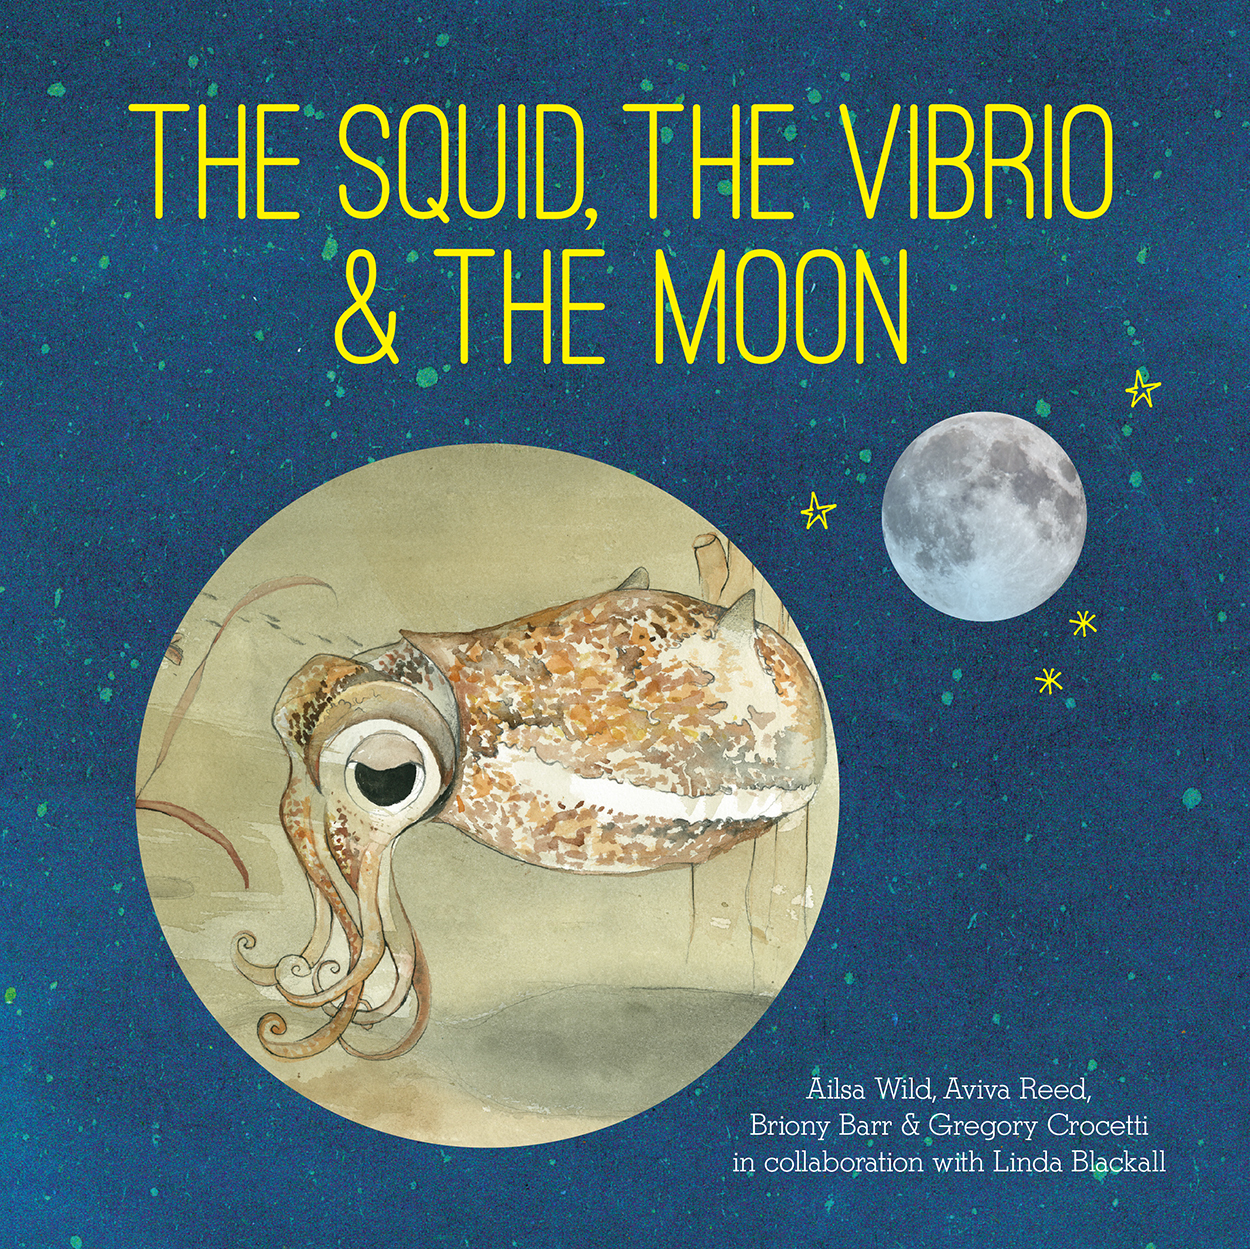 Cover of The Squid, the Vibrio and the Moon featuring an illustrated squid with a moon in the background